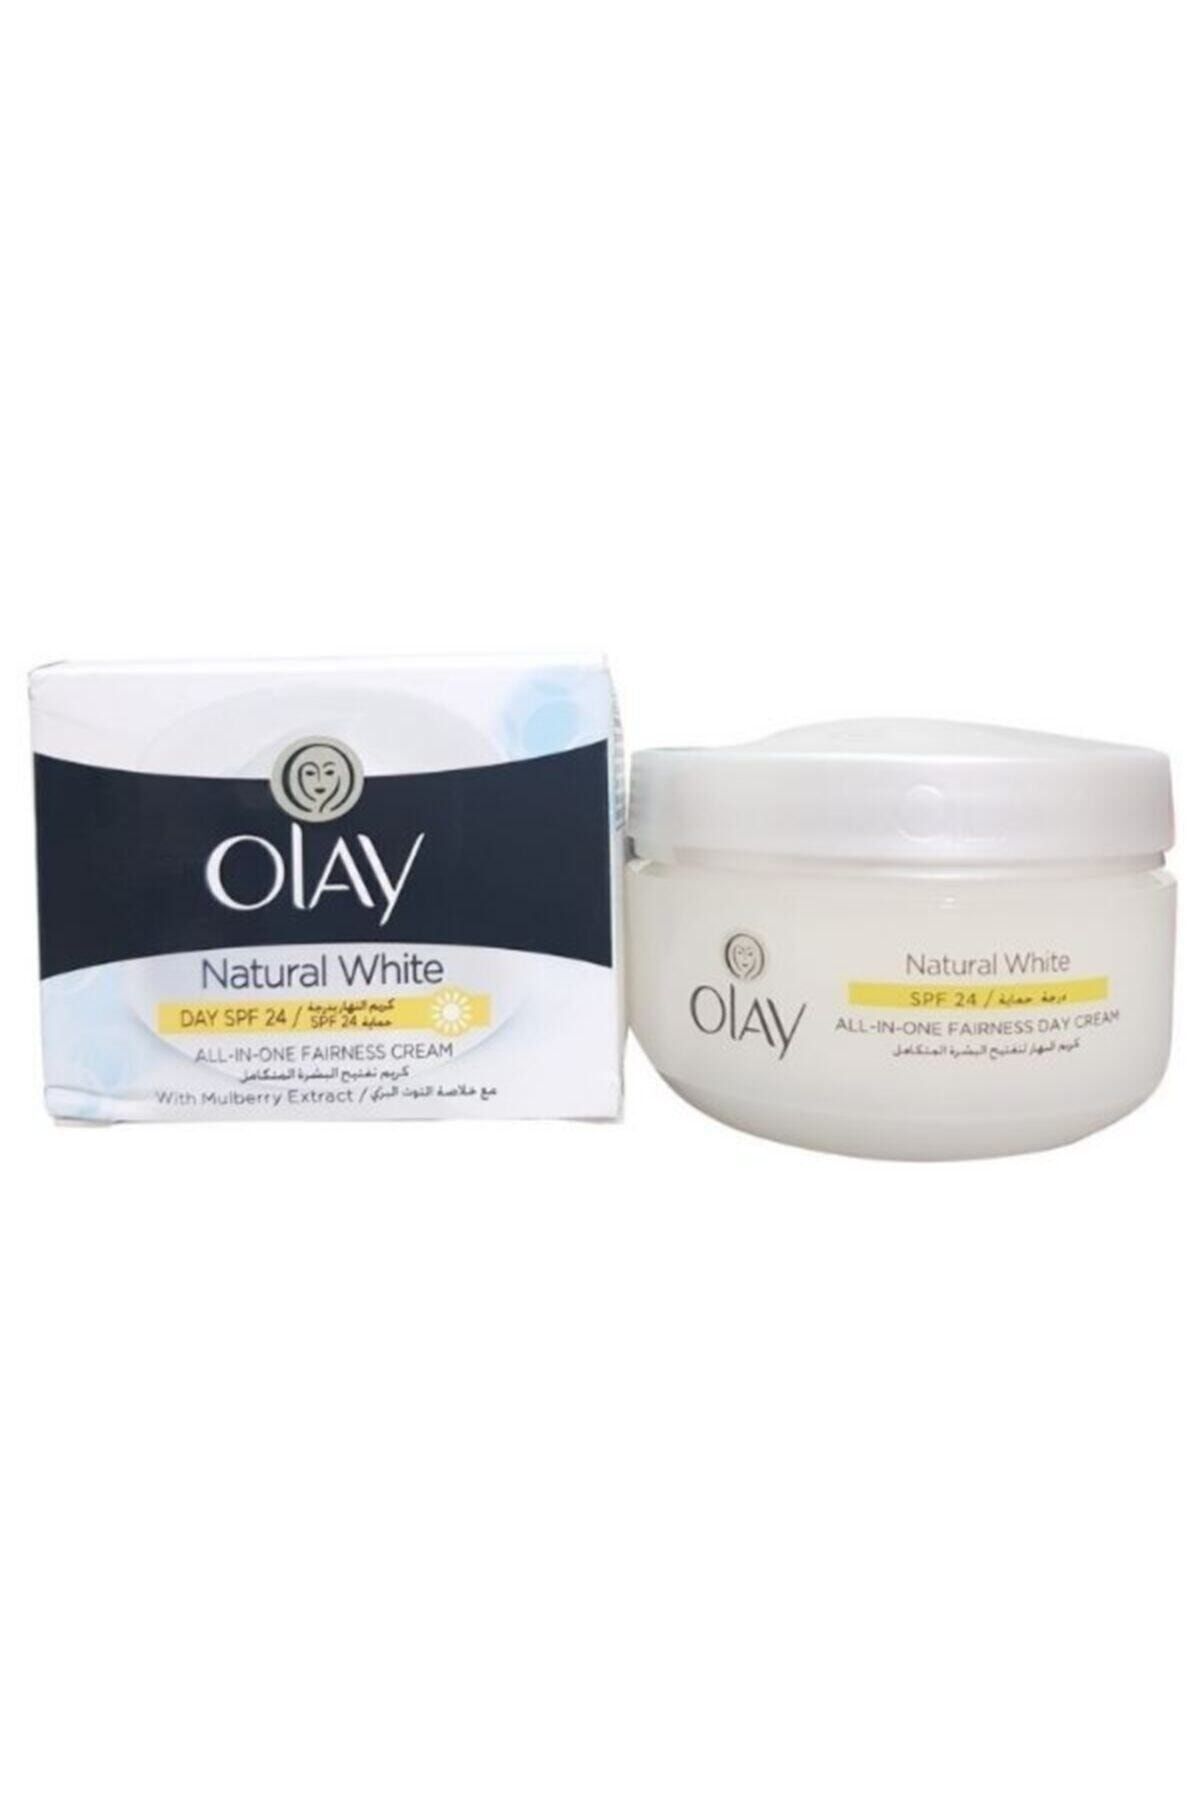 OLAY Natural White 7 In One Glowing Fairness Cream Spf 24